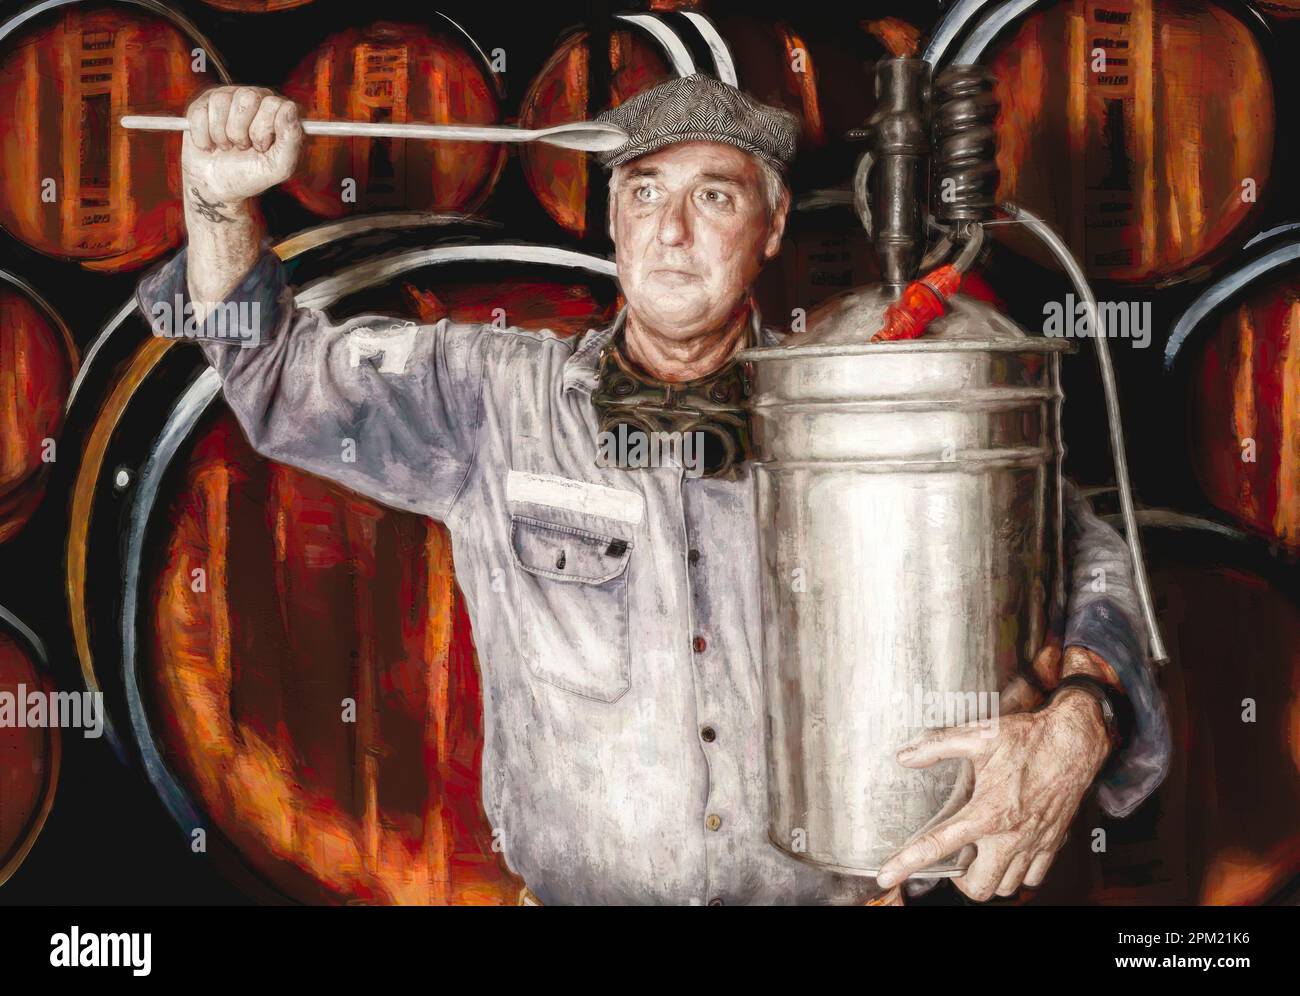 Oil painting styled art on a distillery chief batching a brew on whisky barrel background Stock Photo